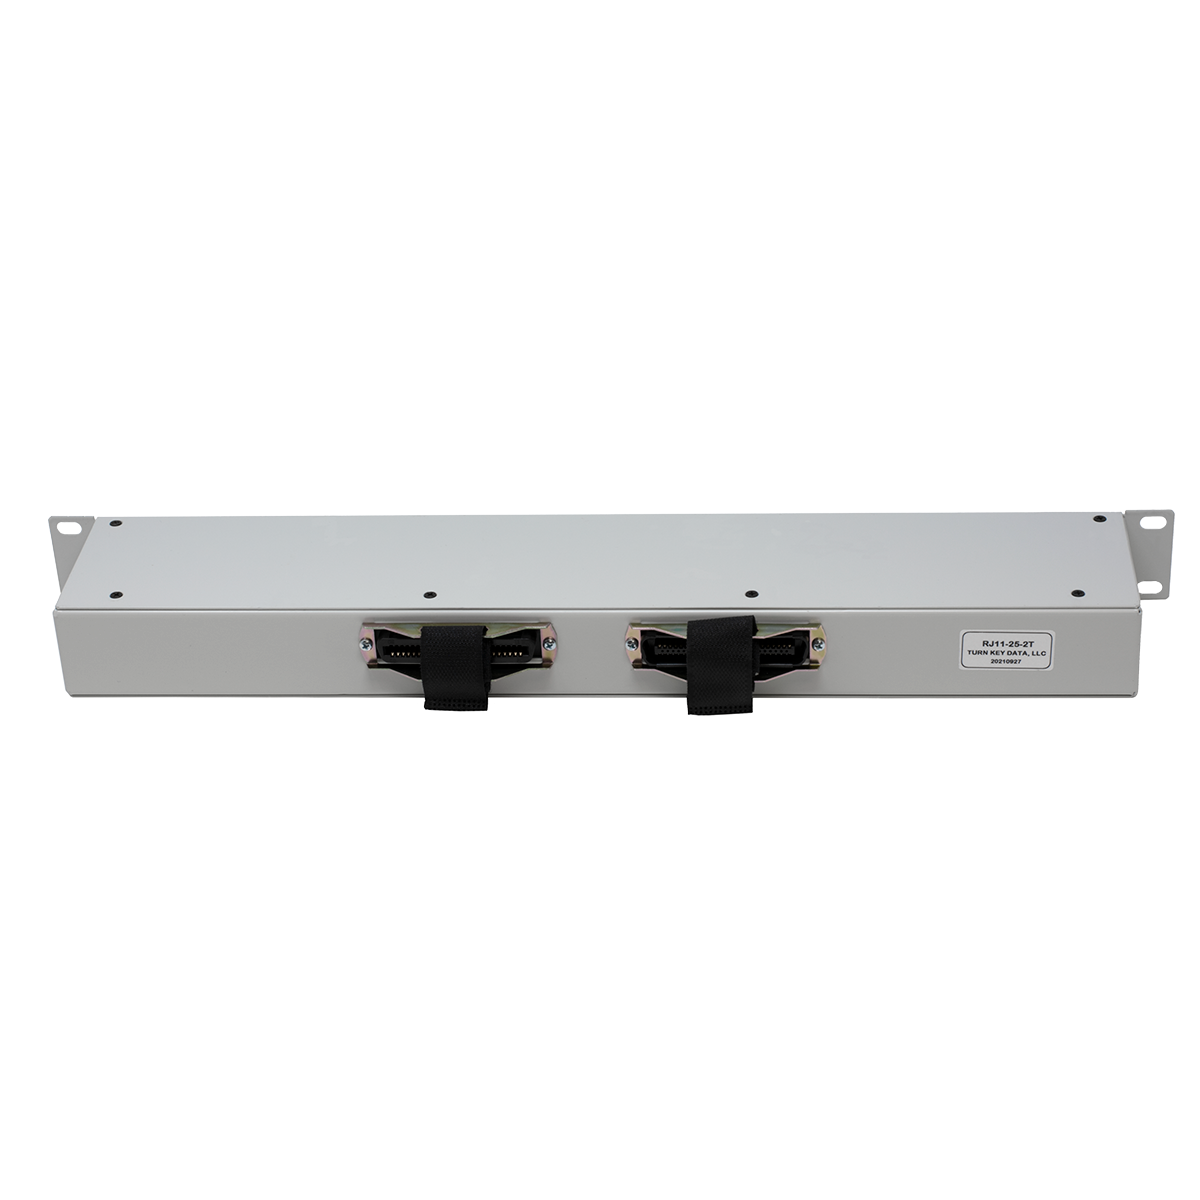 25 Port 1 Pair RJ-45 Patch Panel with Male and Female Amp (Back View)